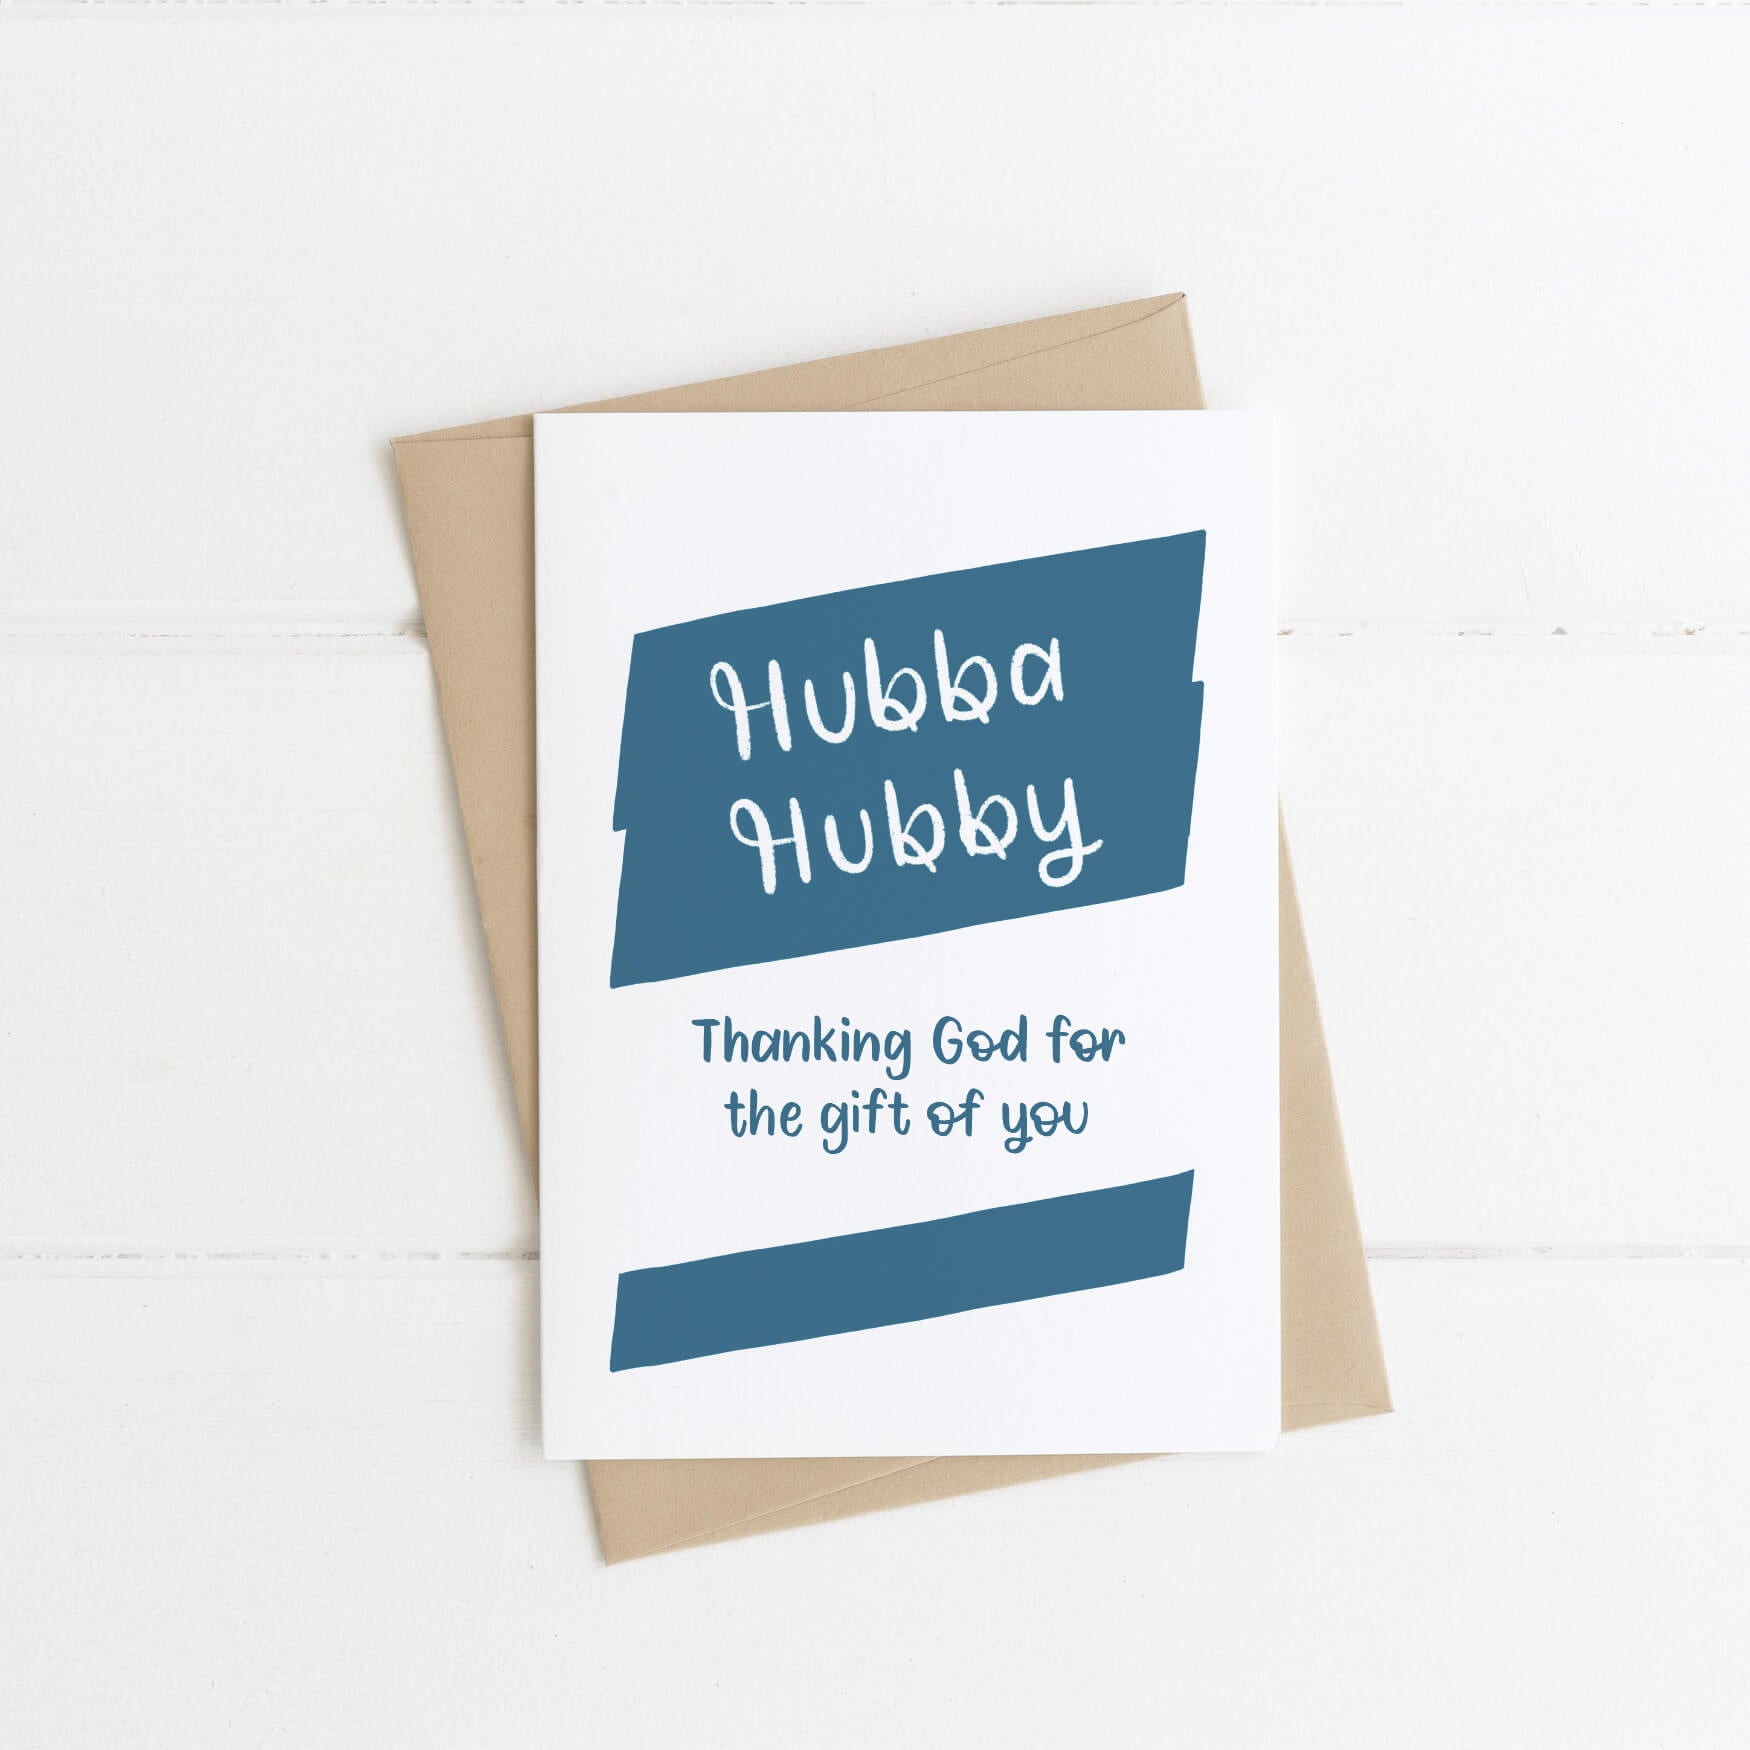 Hubba Hubby Thanking God For You Personalisable Christian Card without personalisation